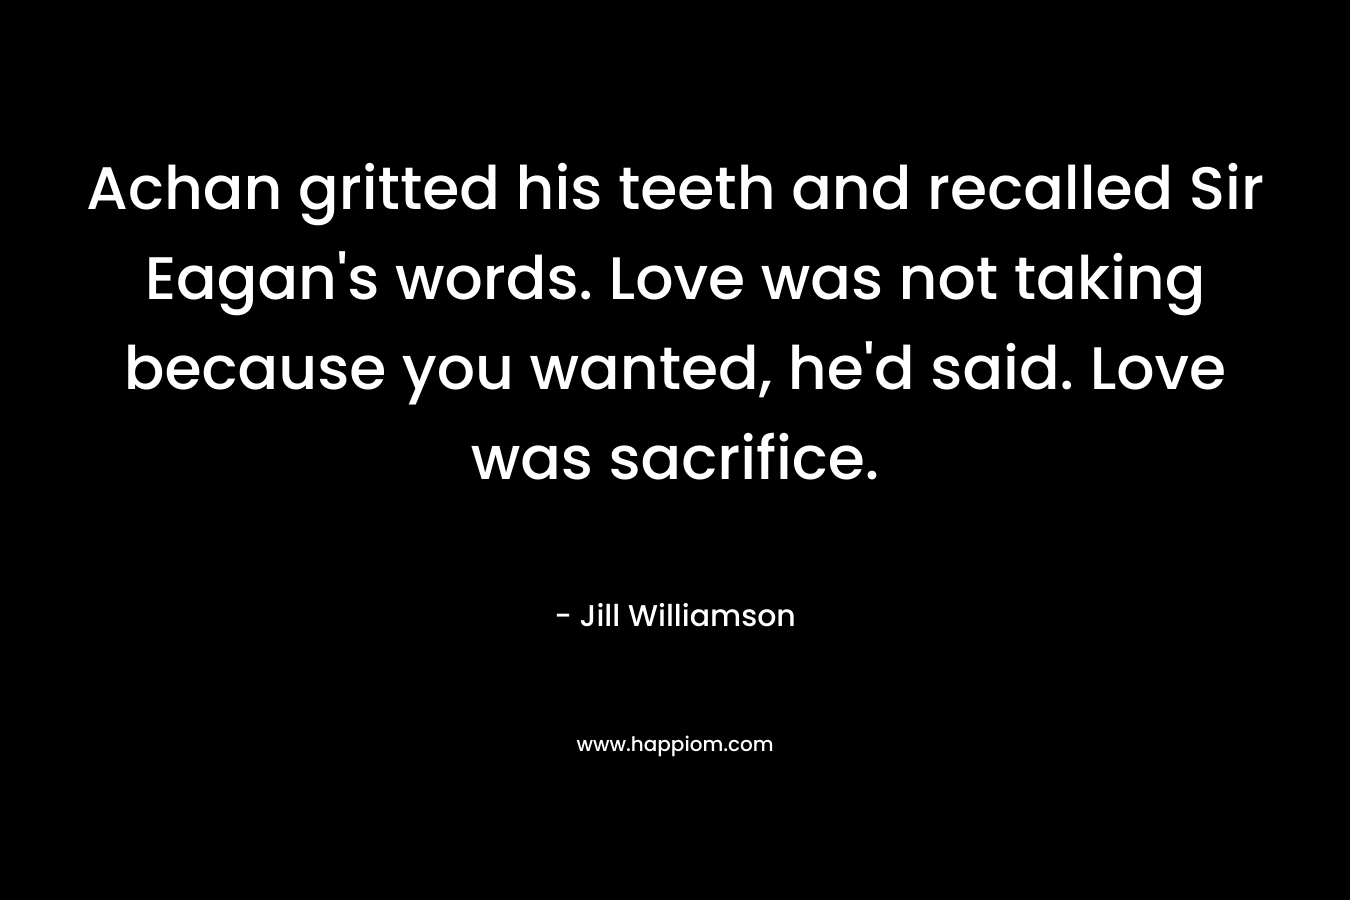 Achan gritted his teeth and recalled Sir Eagan's words. Love was not taking because you wanted, he'd said. Love was sacrifice.